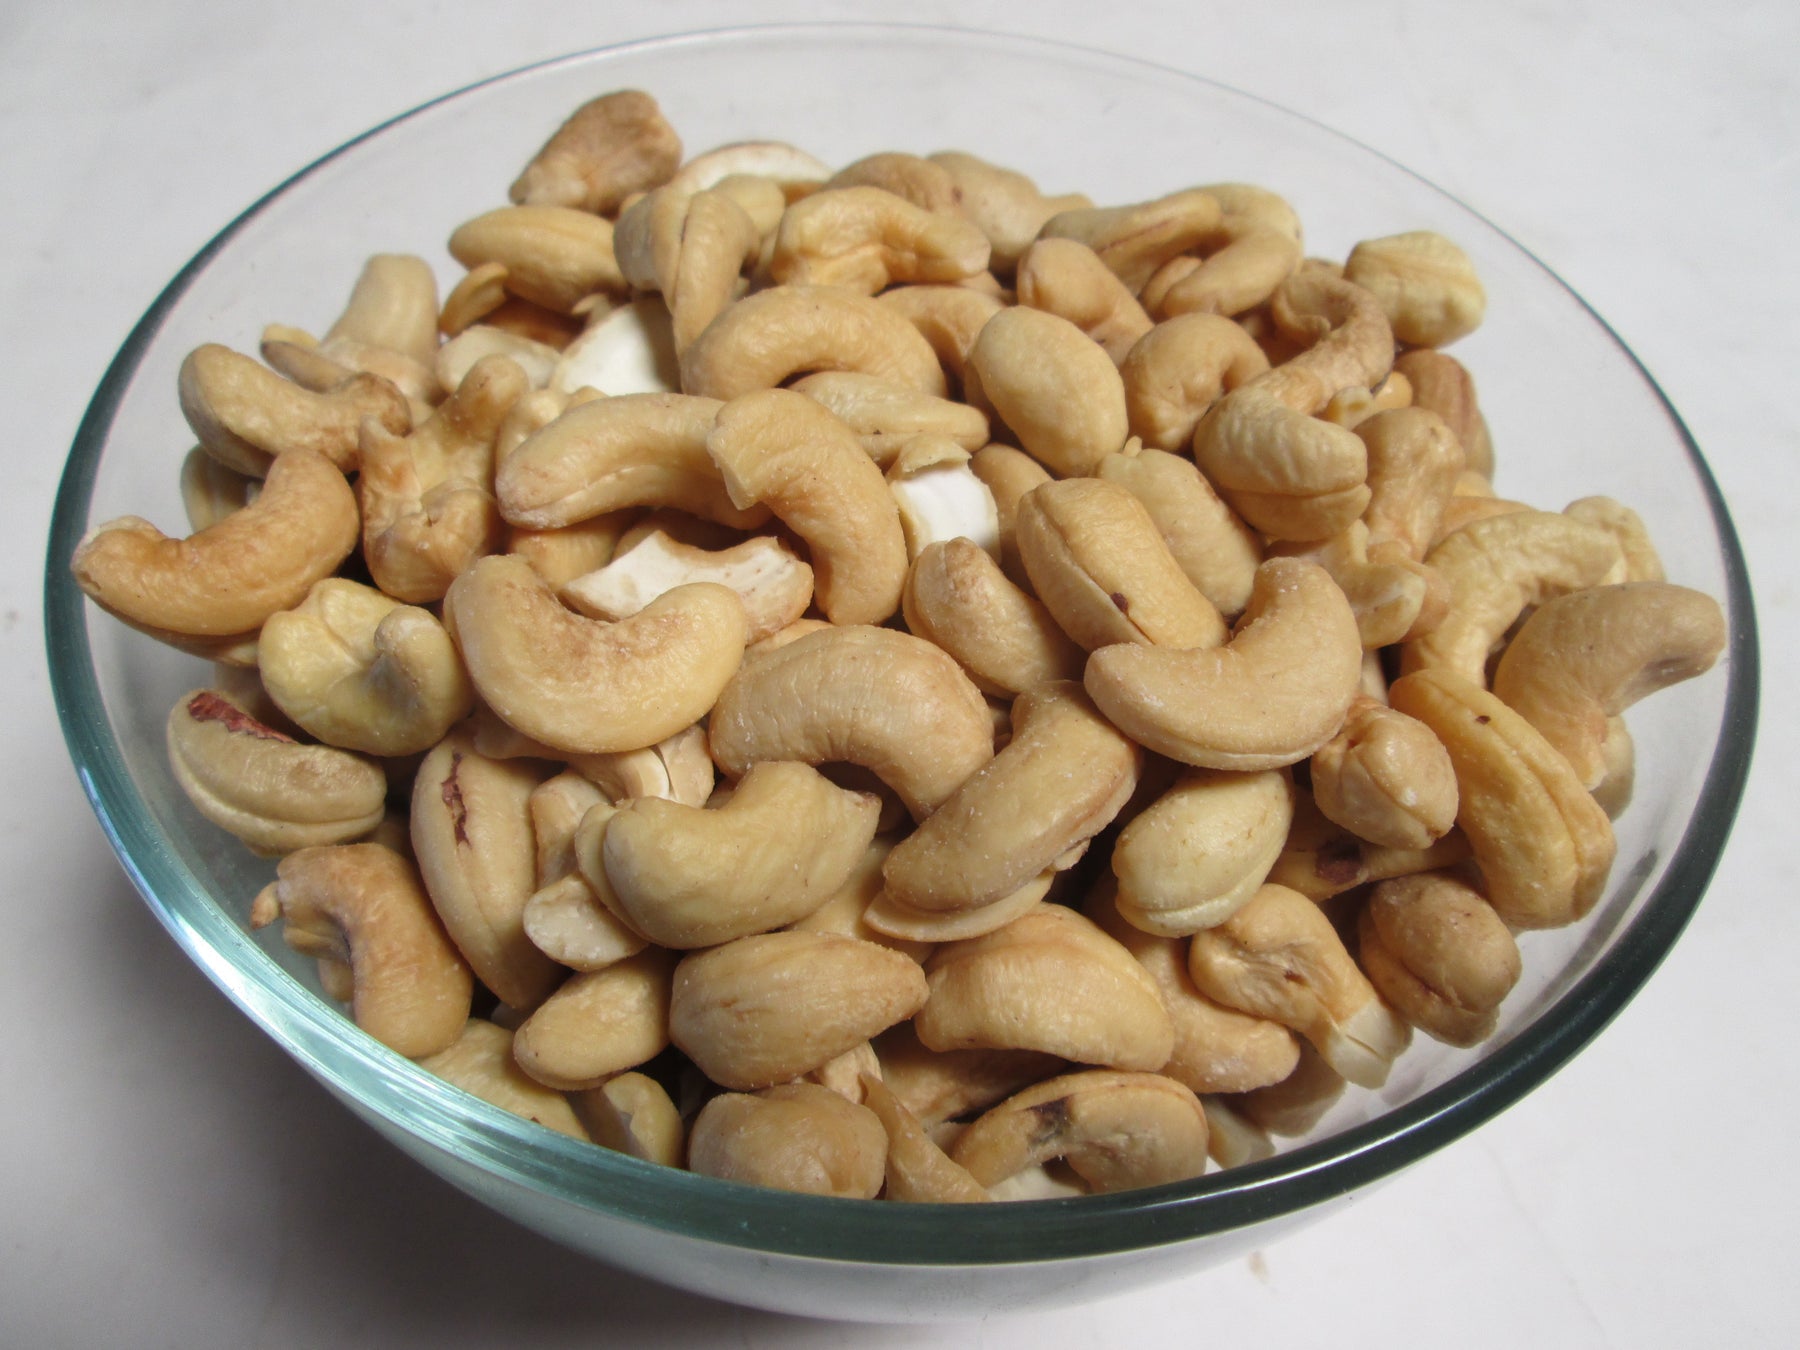 Roasted whole Cashews, 320CT, 25 lbs / case